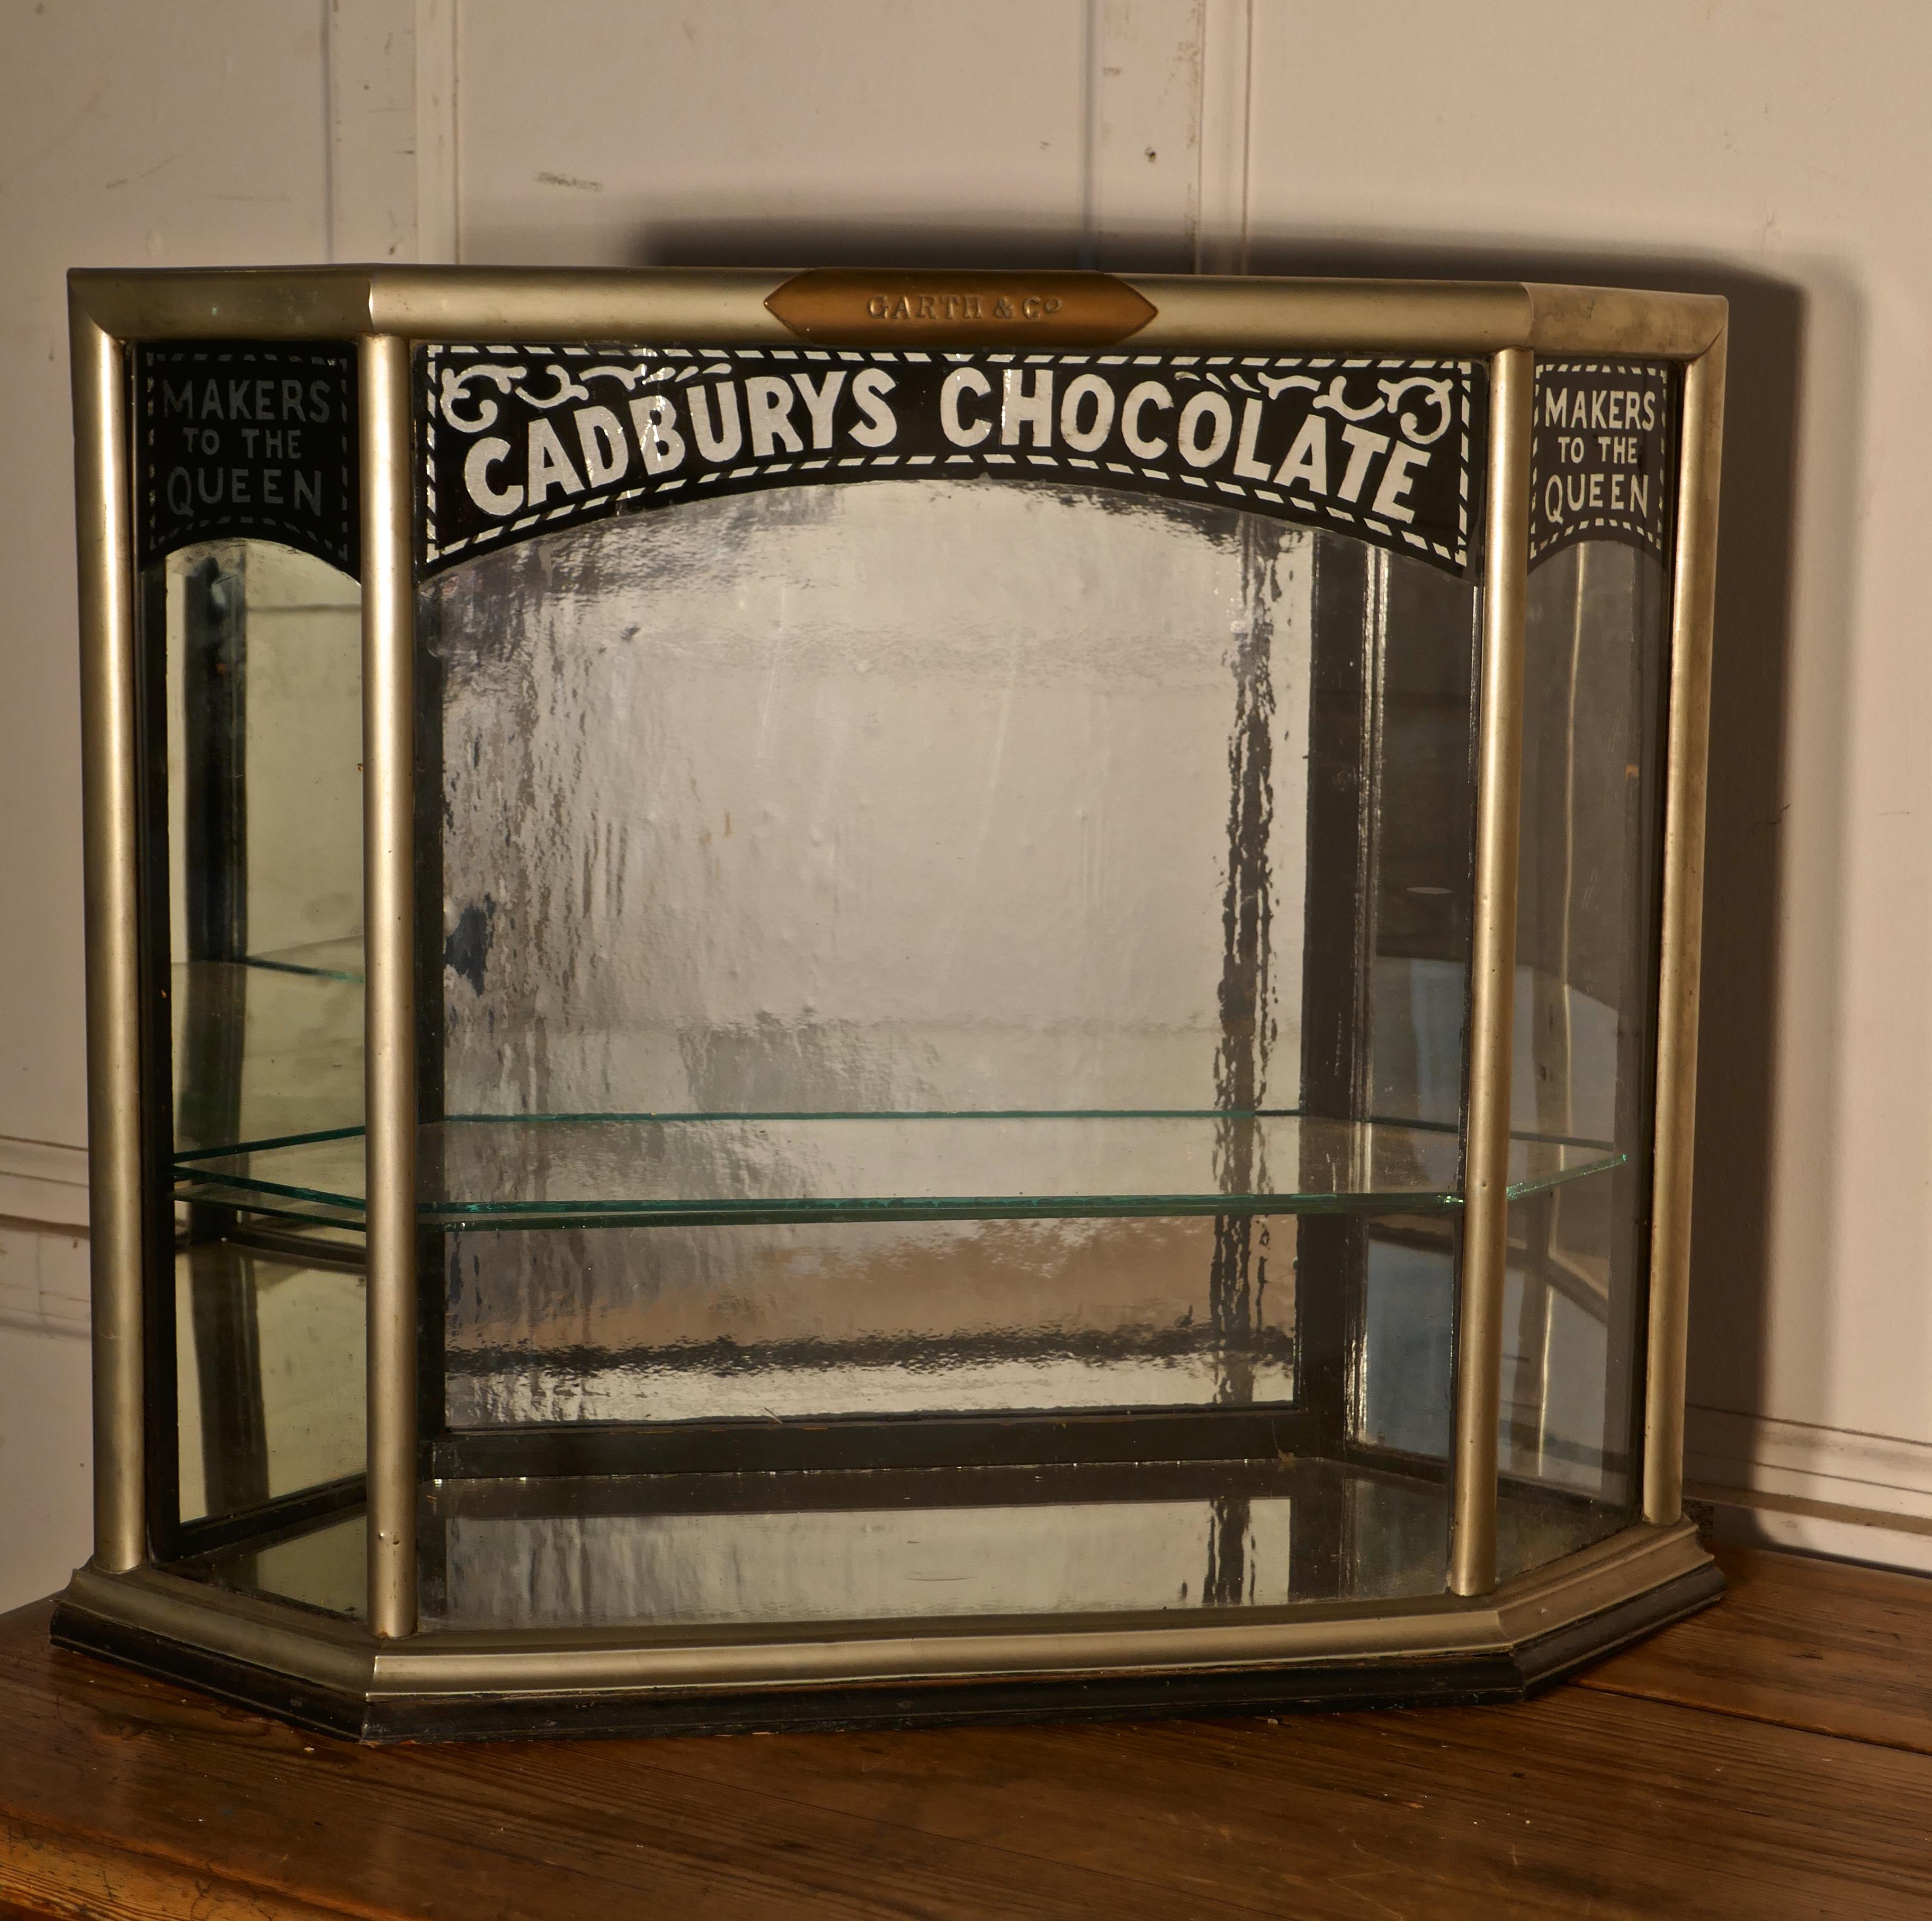 Cadbury’s Art Deco Display Cabinet, Art Deco Crome

This a small but Charming Cadbury’s Sweet Shop Display Cabinet it is a counter top piece, from above you can see it is in the shape of a Convex Hexagon, with a small door at each end,
The cabinet